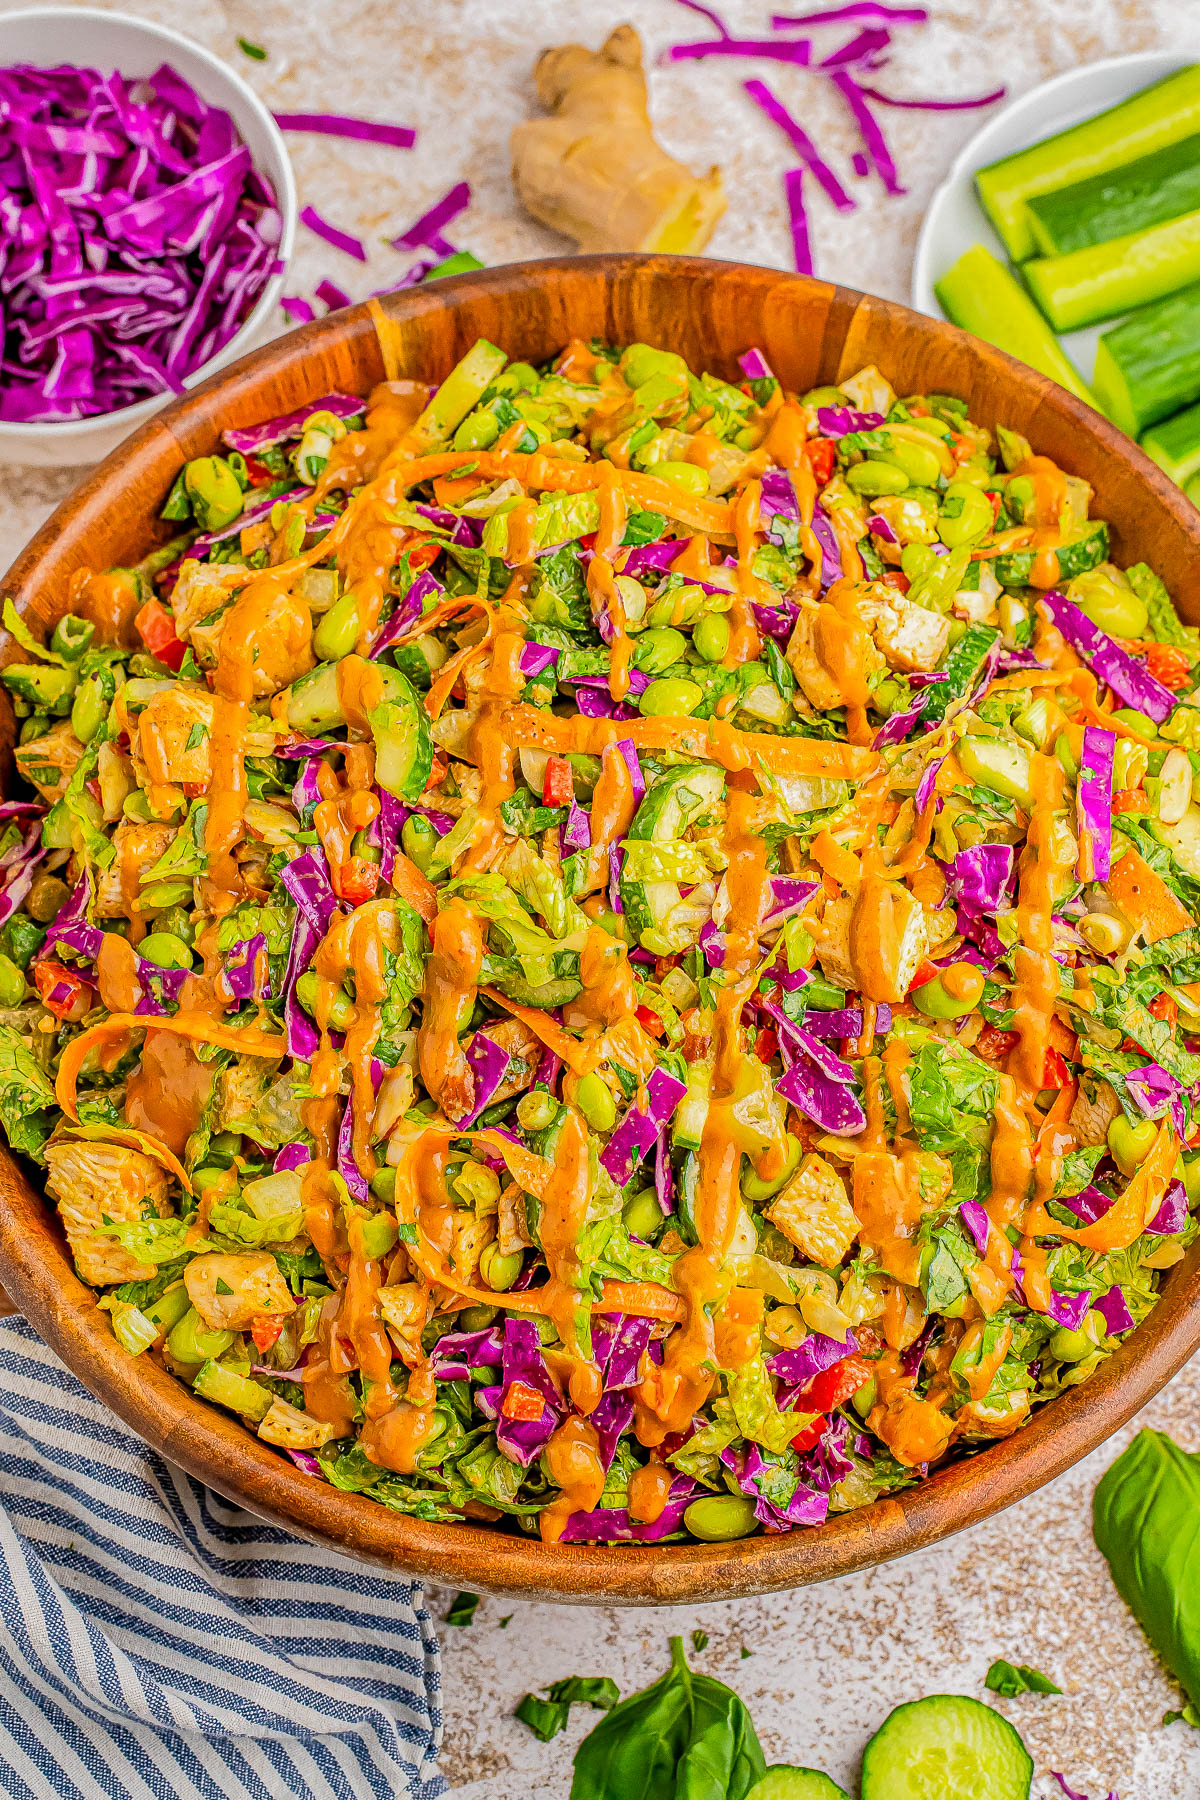 A large wooden bowl filled with a colorful salad of mixed greens, purple cabbage, edamame, and other vegetables, topped with an orange dressing. Plates of additional ingredients are in the background.